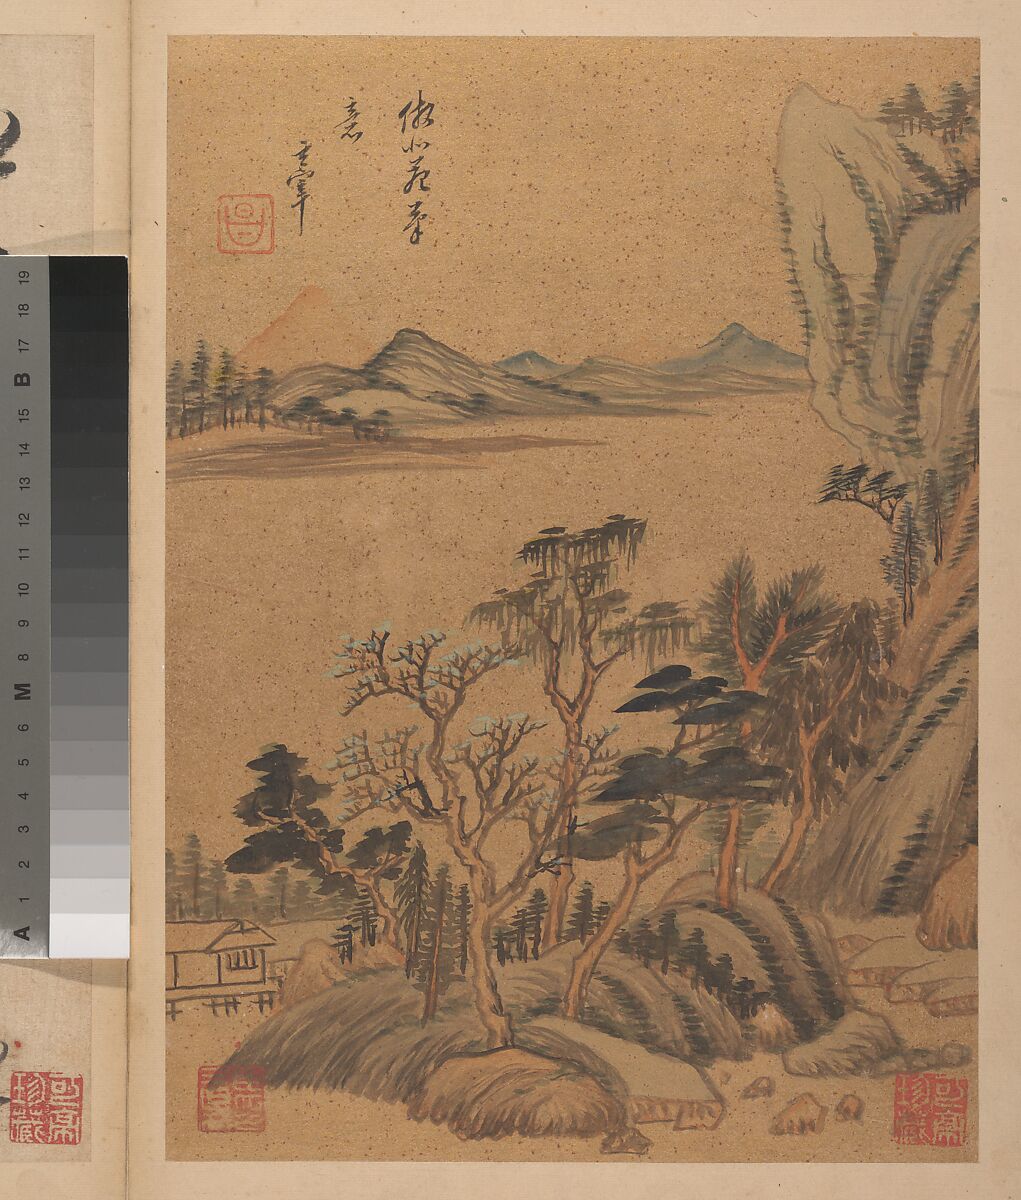 Landscapes and poems, Dong Qichang (Chinese, 1555–1636), Album of eight double leaves; ink, gold, and color on gold-flecked paper and ink on satin, China 